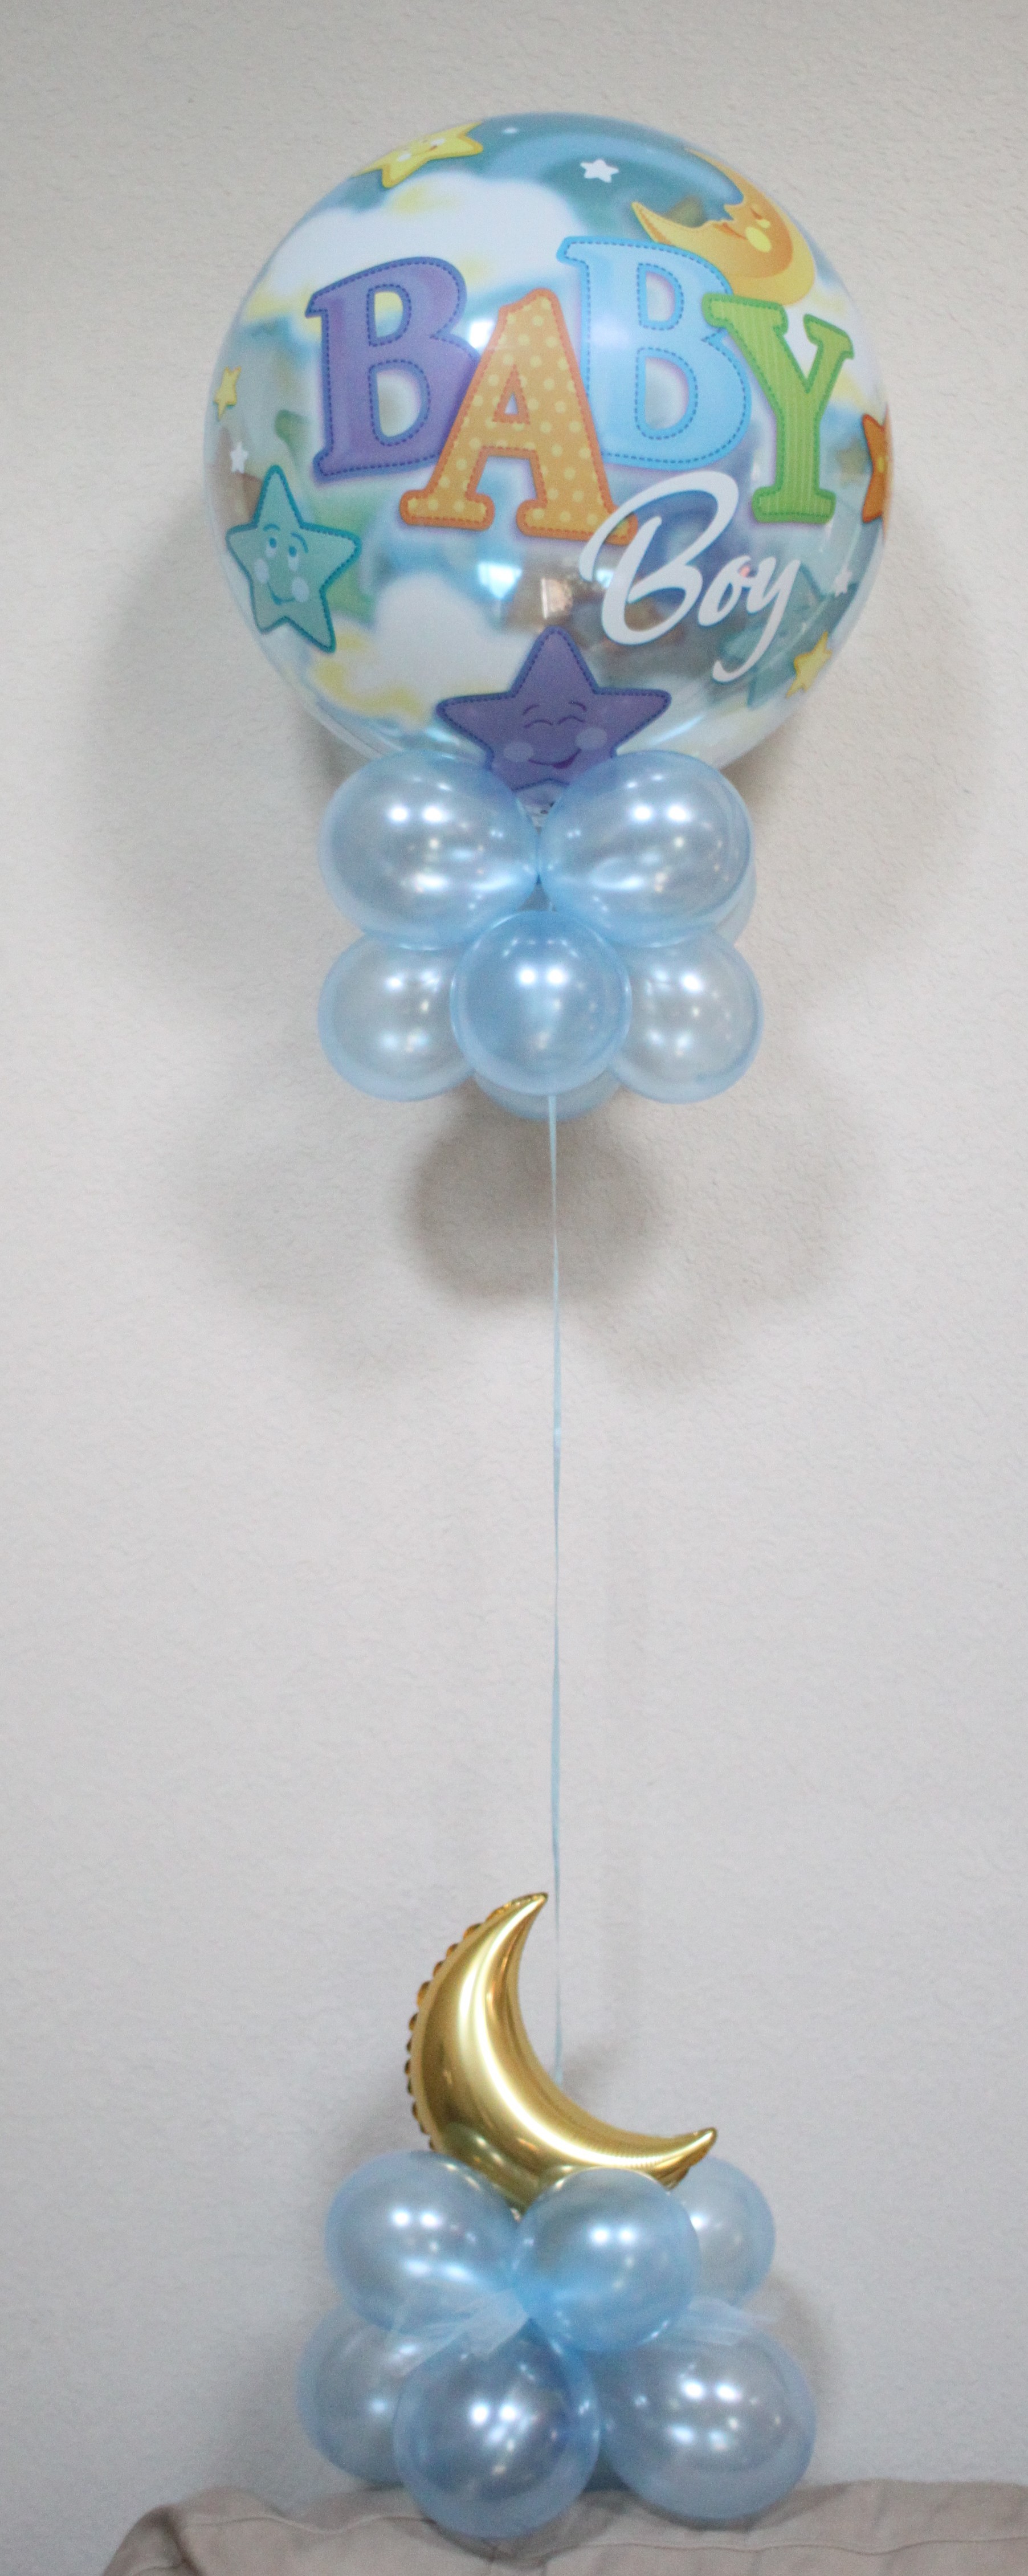 Baby Shower Balloons for a Boy | Photo credit: Pop Artist  -  Foter  -  CC BY-ND